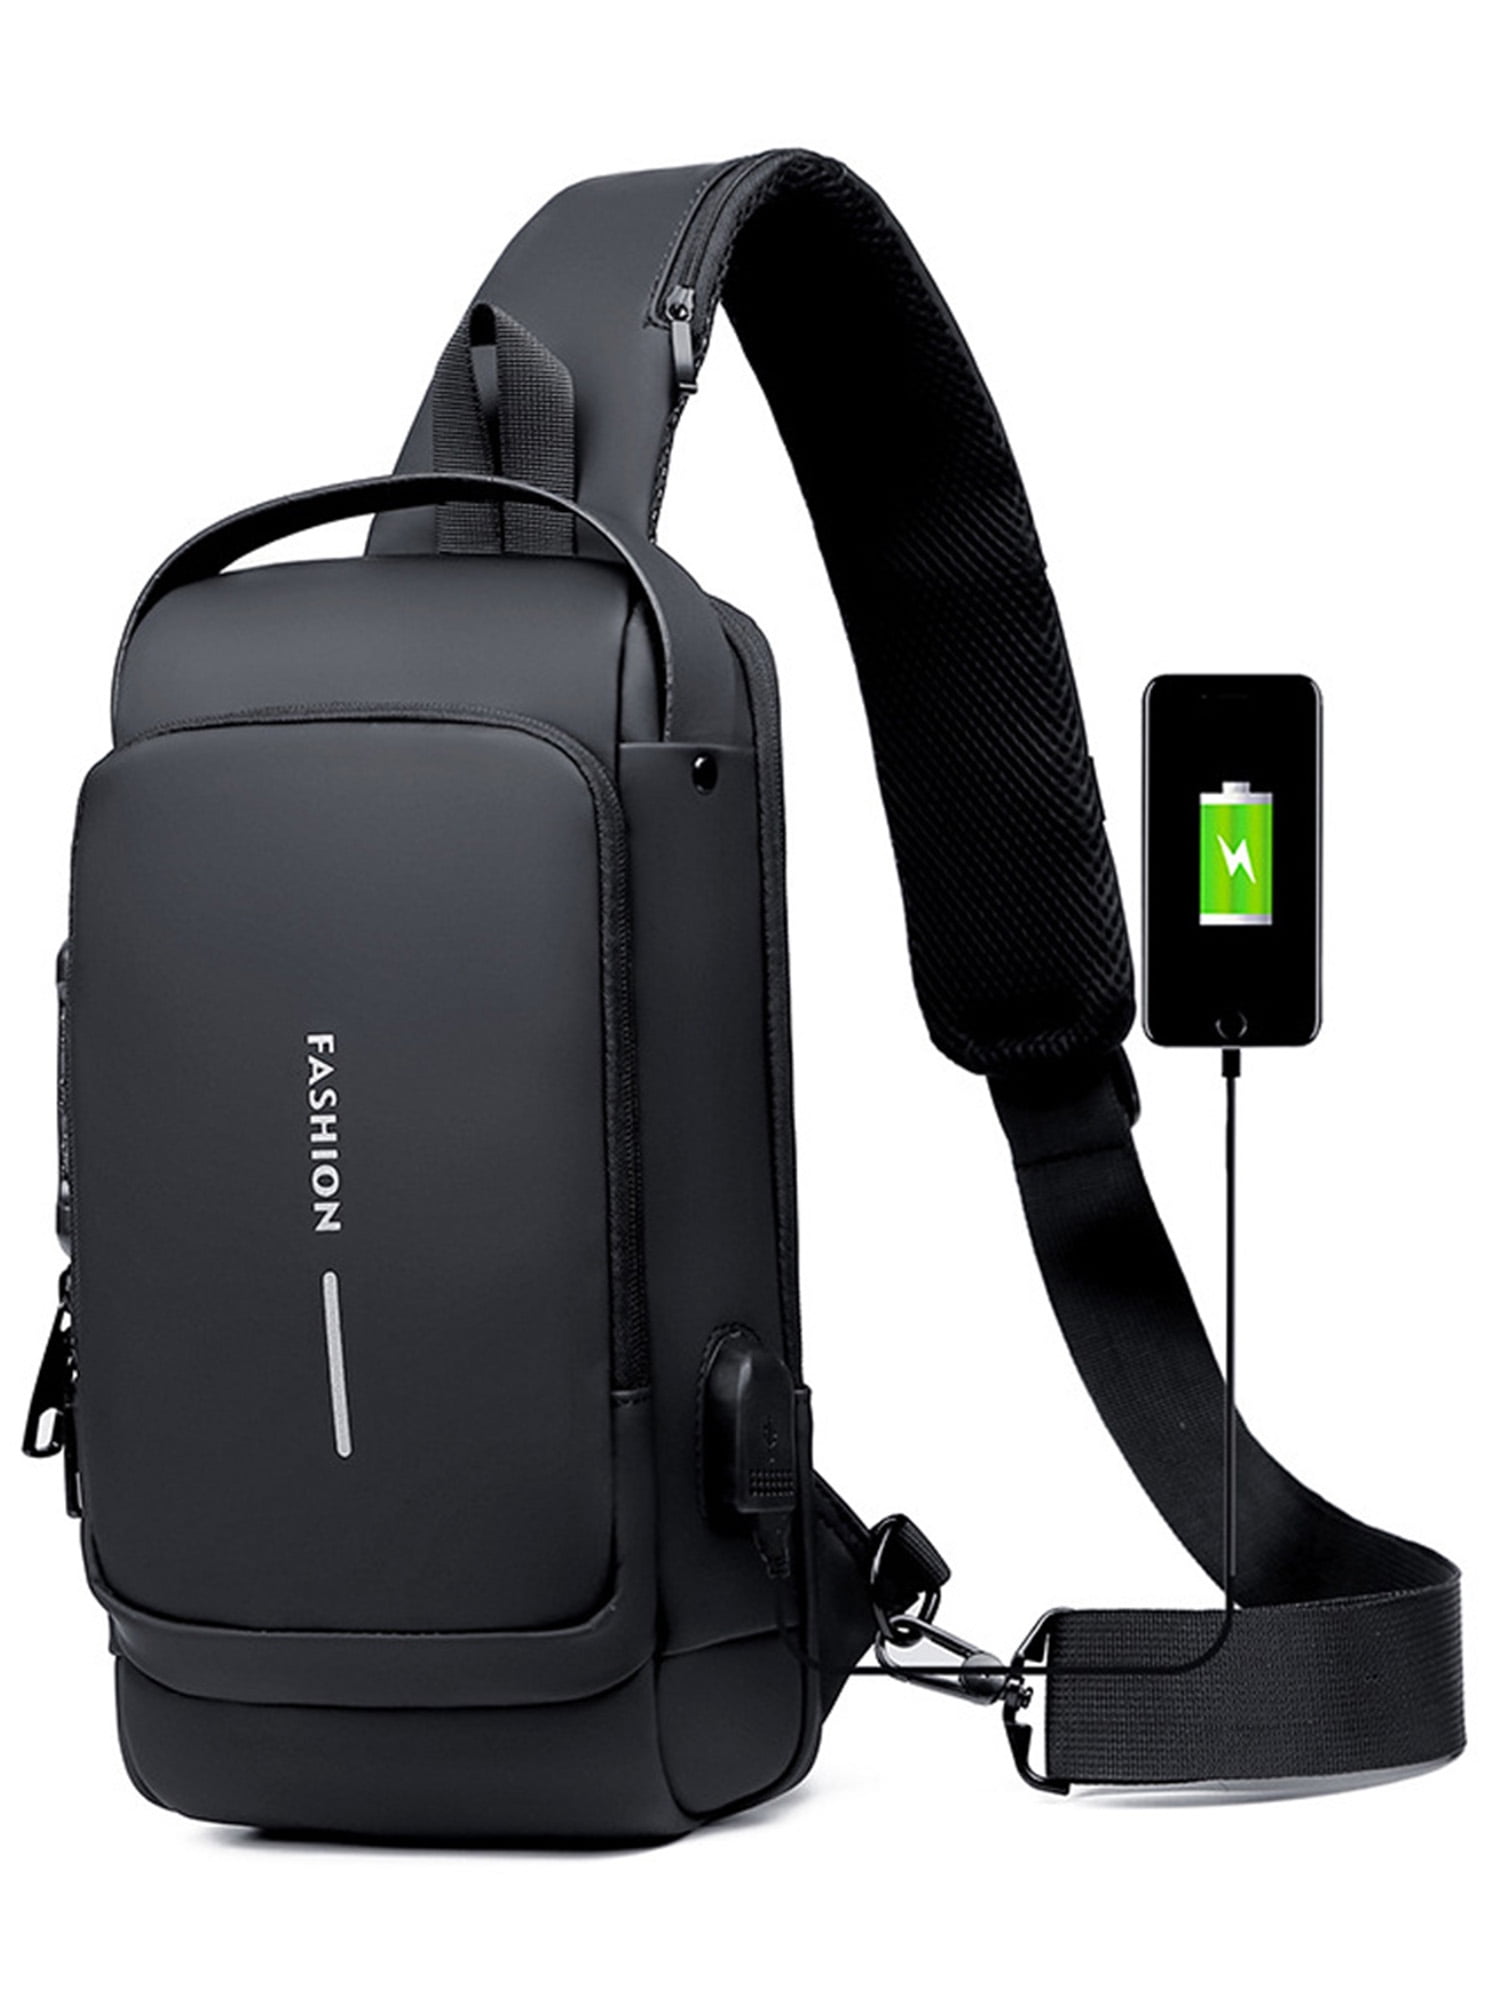 Shoppers Rave About the Lovevook Backpack for Travel